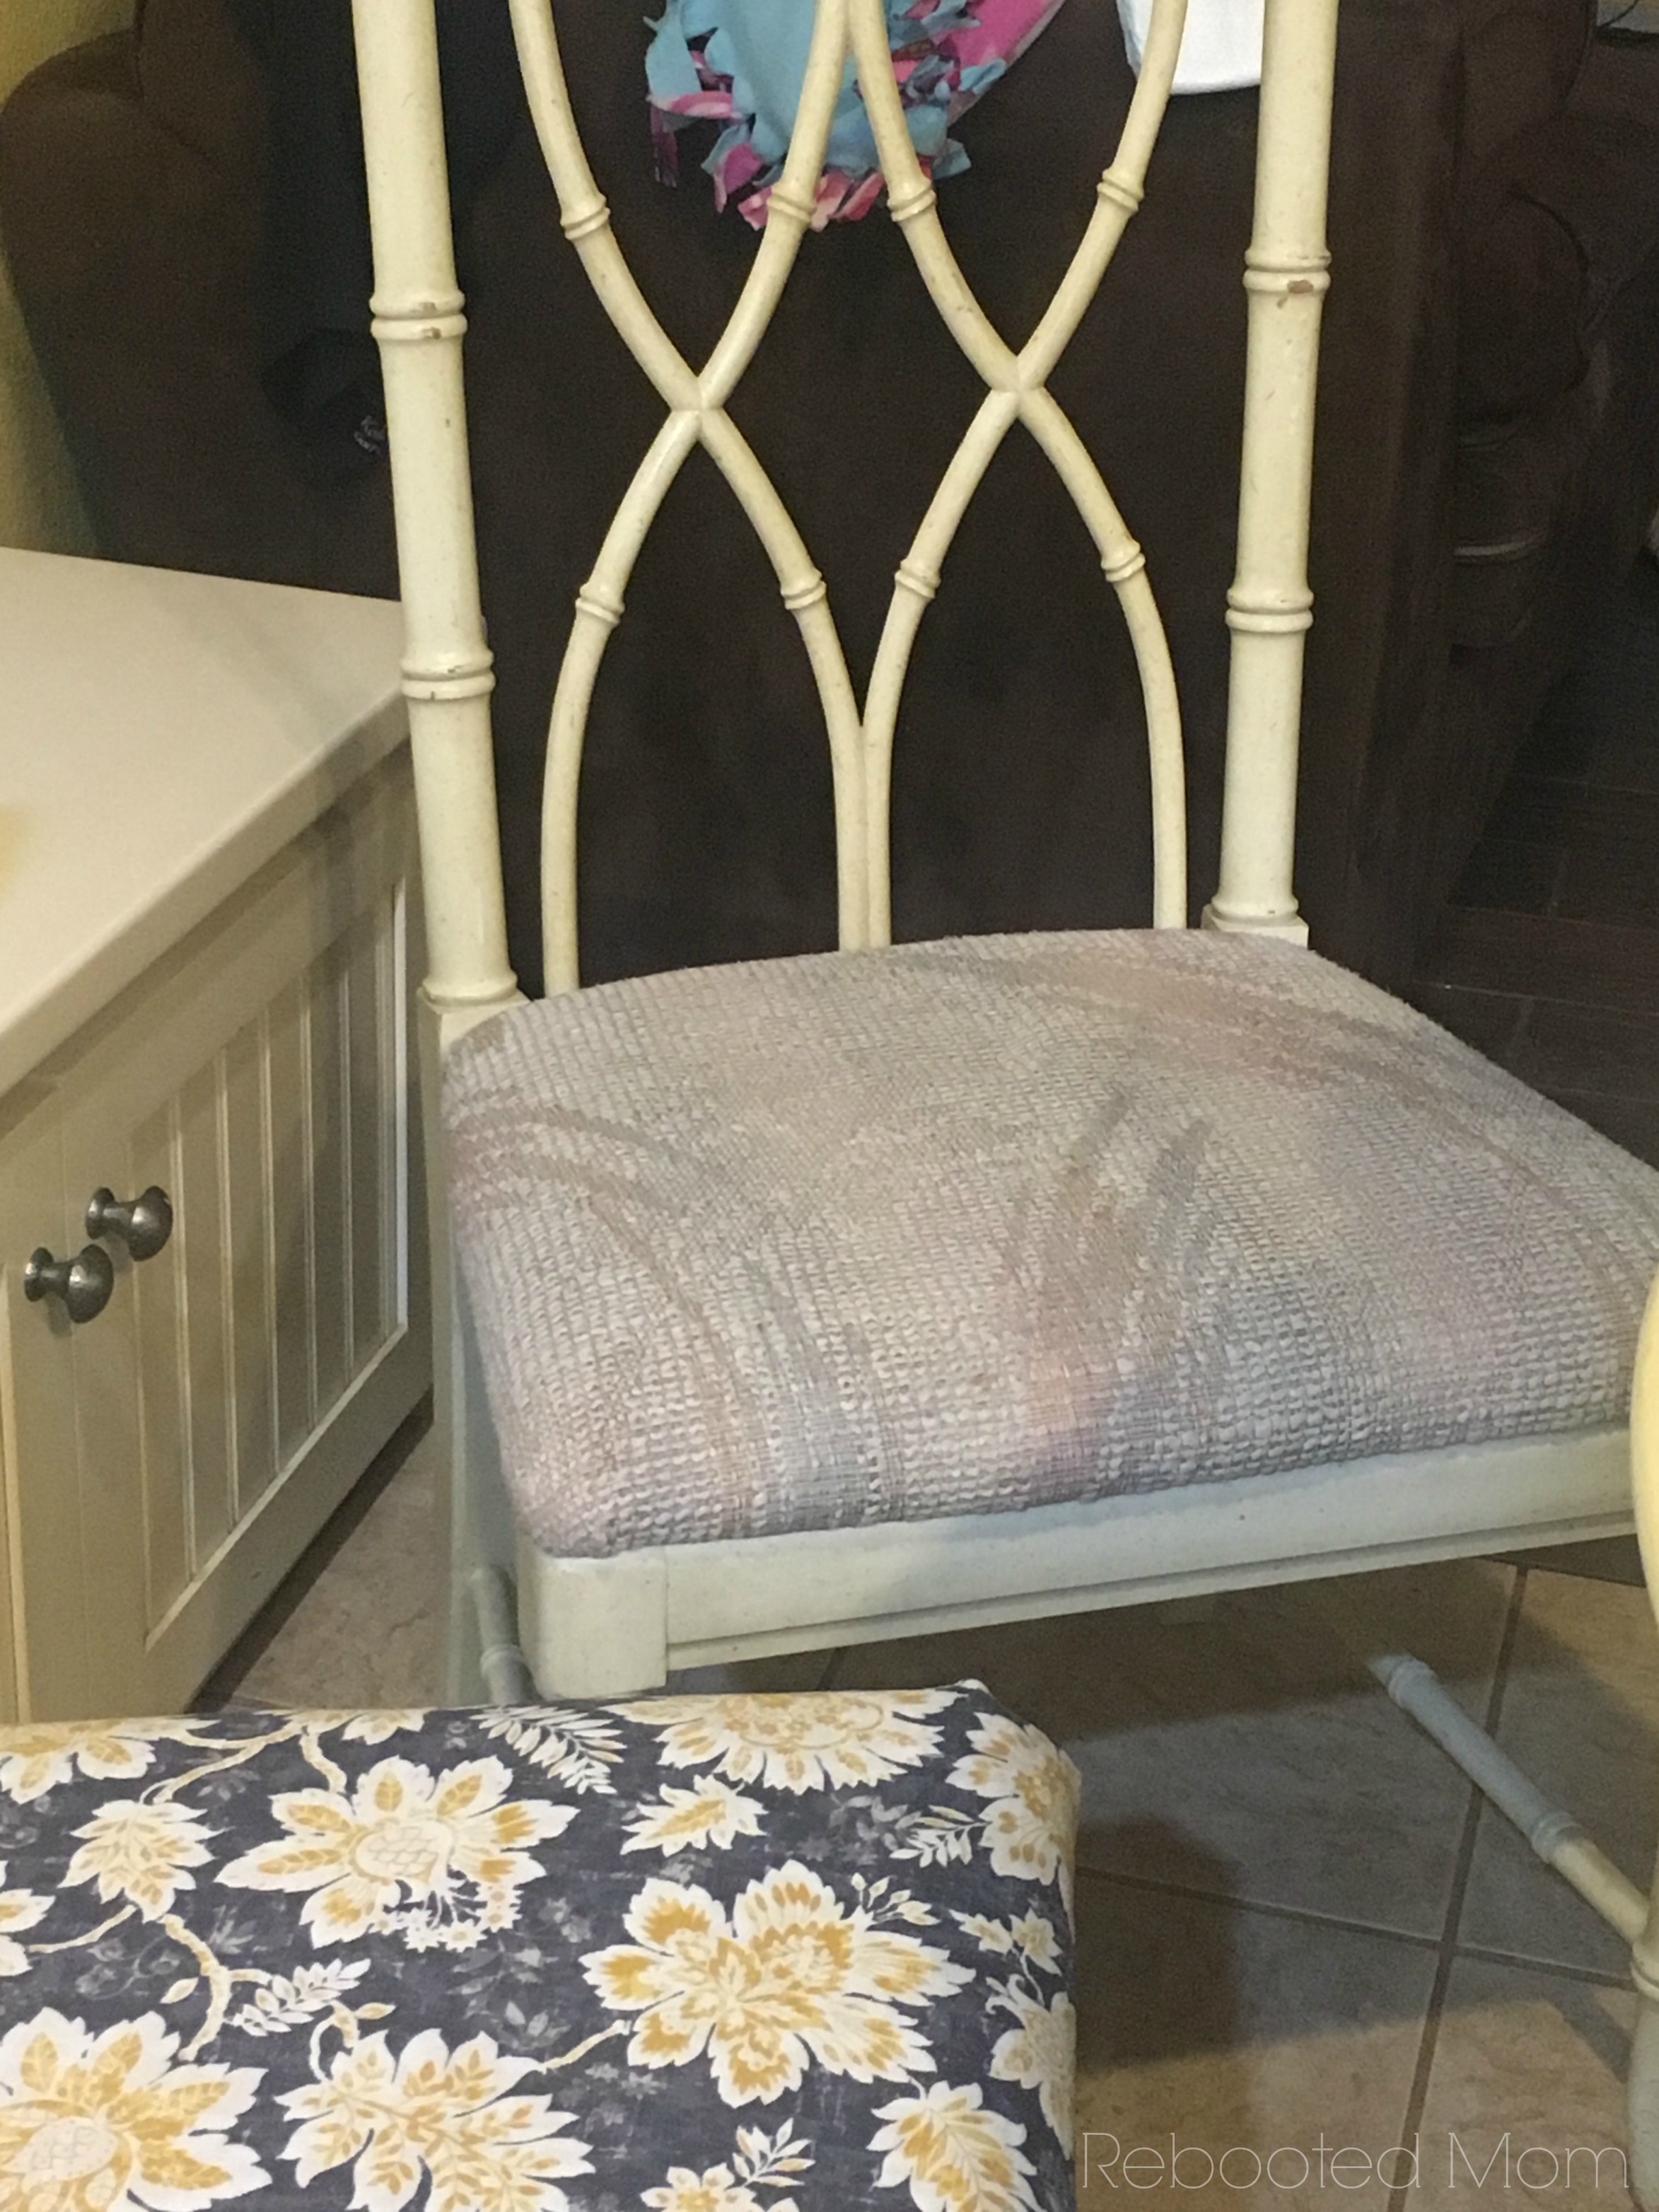 With a little DIY know-how, and a few simple supplies and tools, you can transform ugly dining chairs into beautiful pieces. Here's how to recover chair seat cushions yourself.